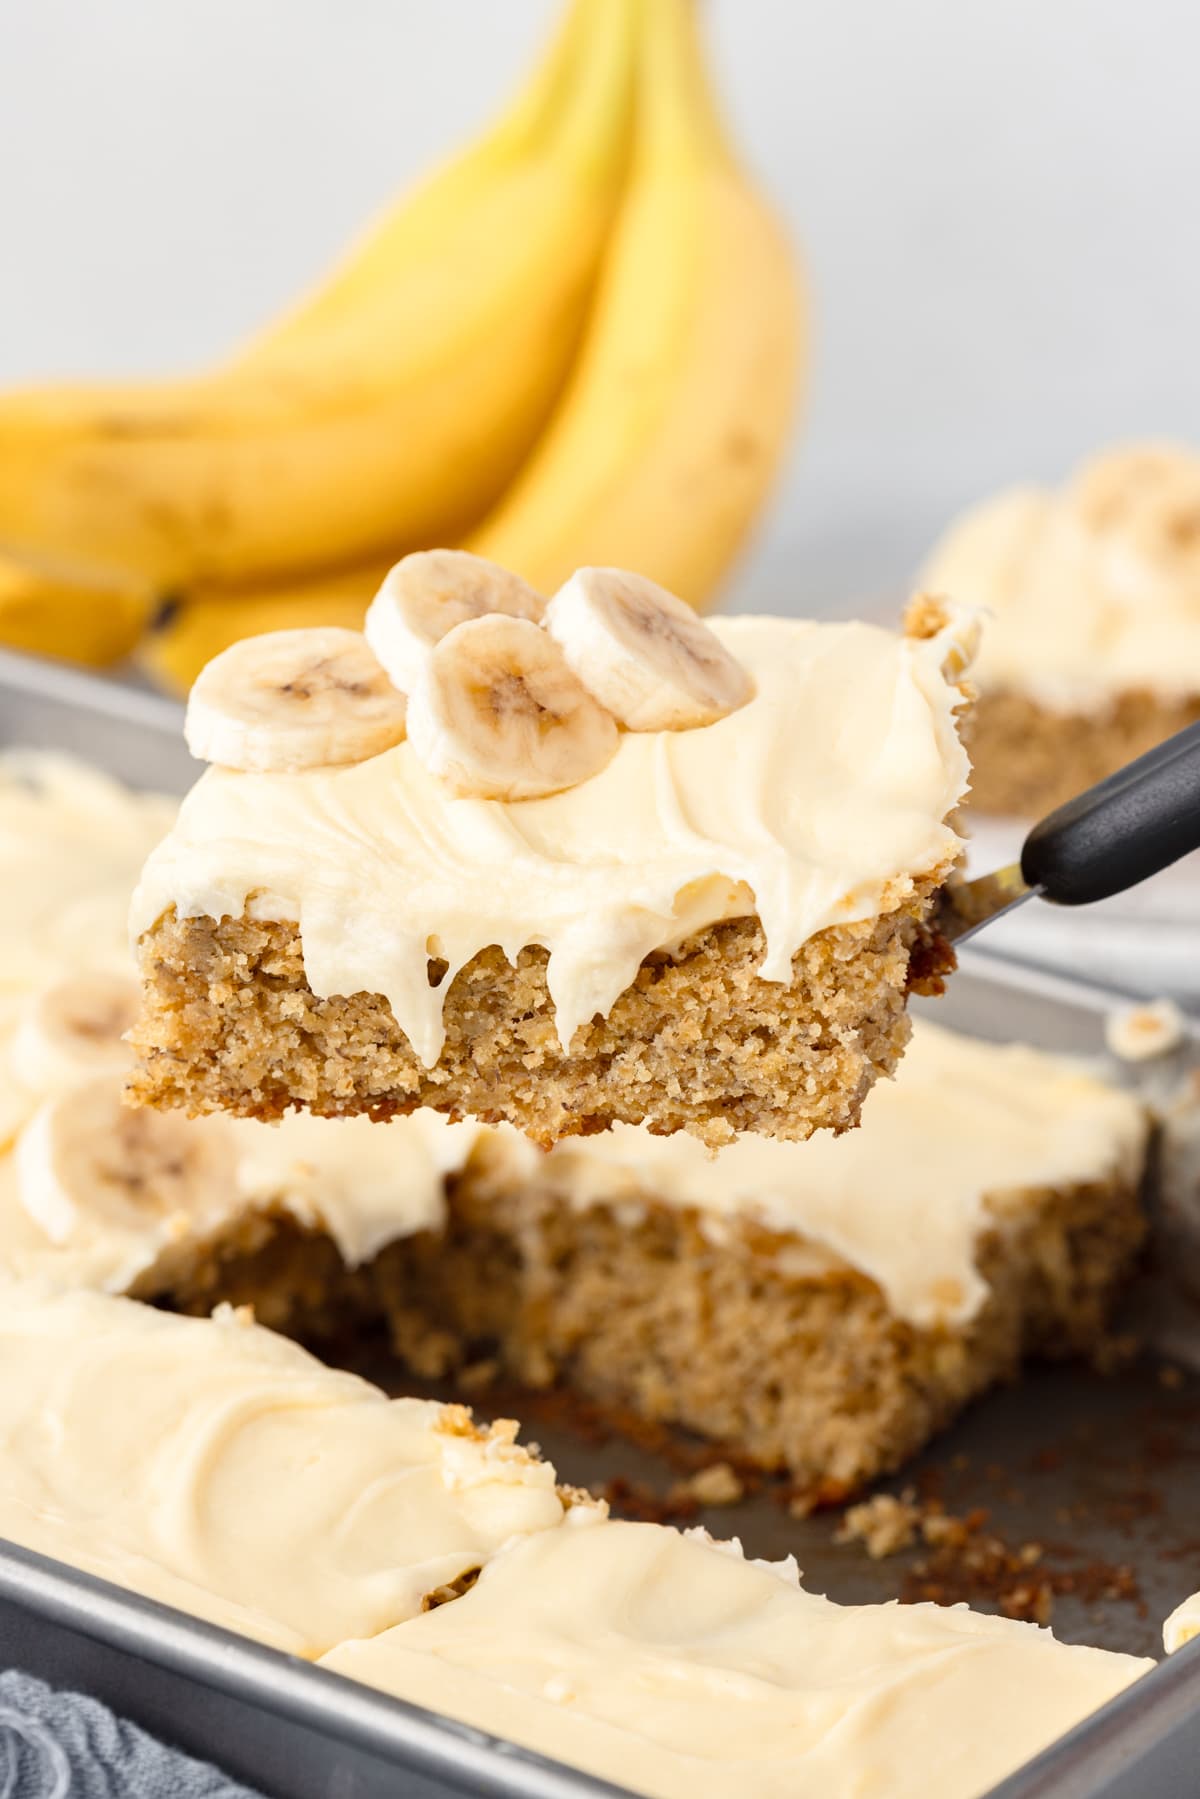 A spatula holds up a slice of banana cake with cream cheese frosting, topped with banana slices.